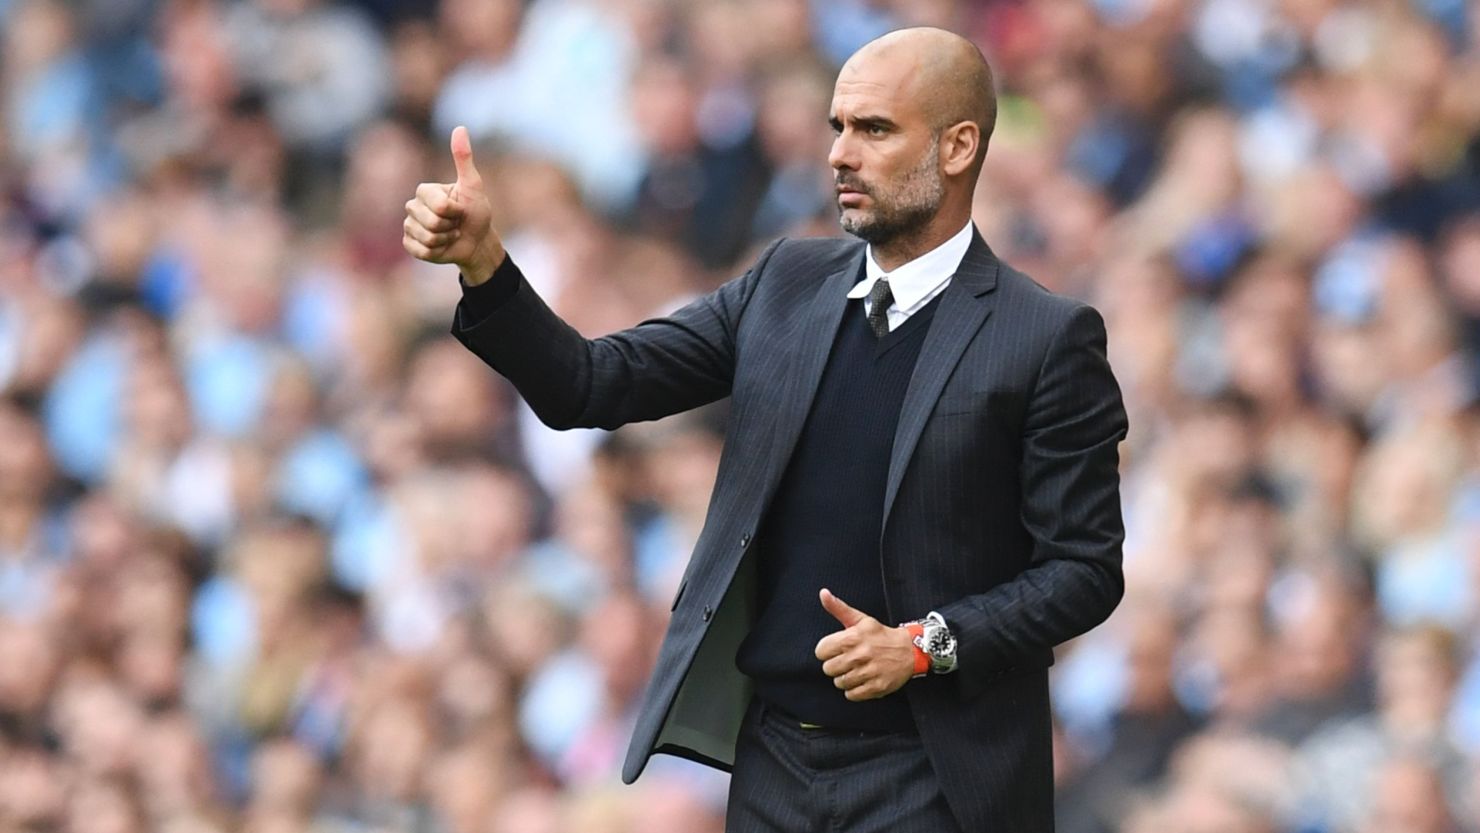 Pep Guardiola oversaw his Manchester City side record a fifth consecutive Premier League win.